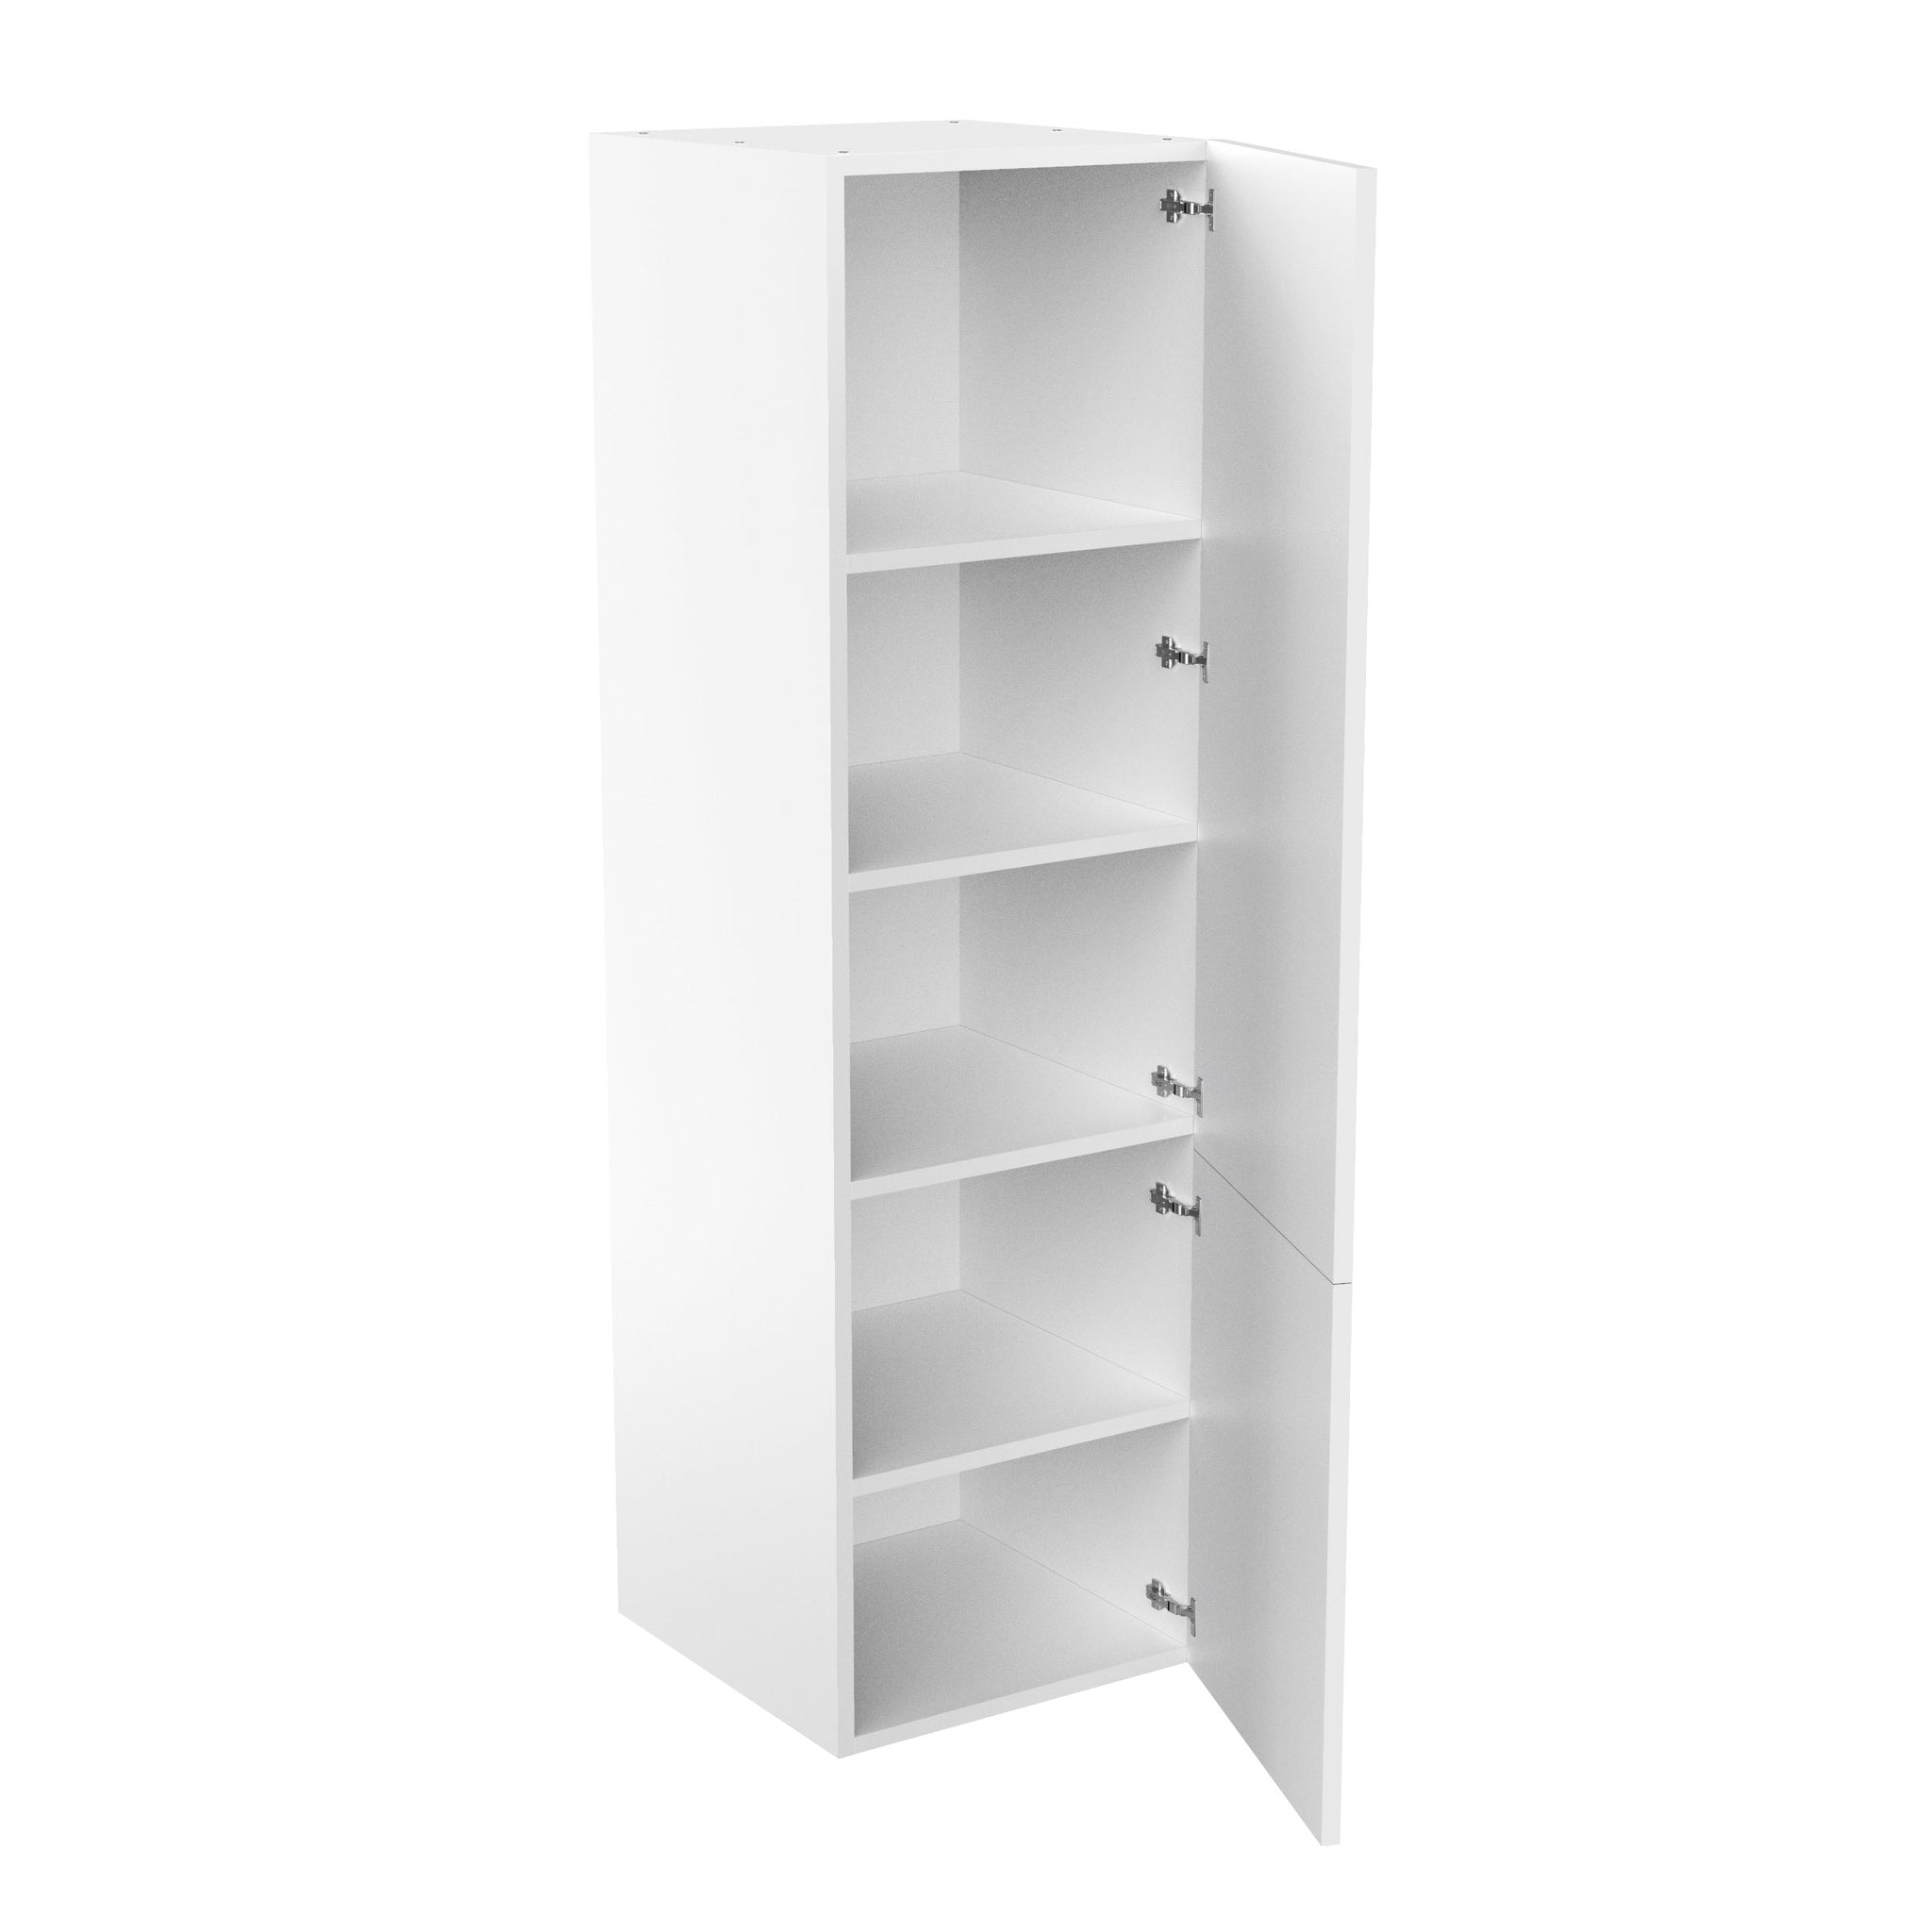 RTA - Glossy White - Single Door Tall Cabinets | 24"W x 84"H x 24"D